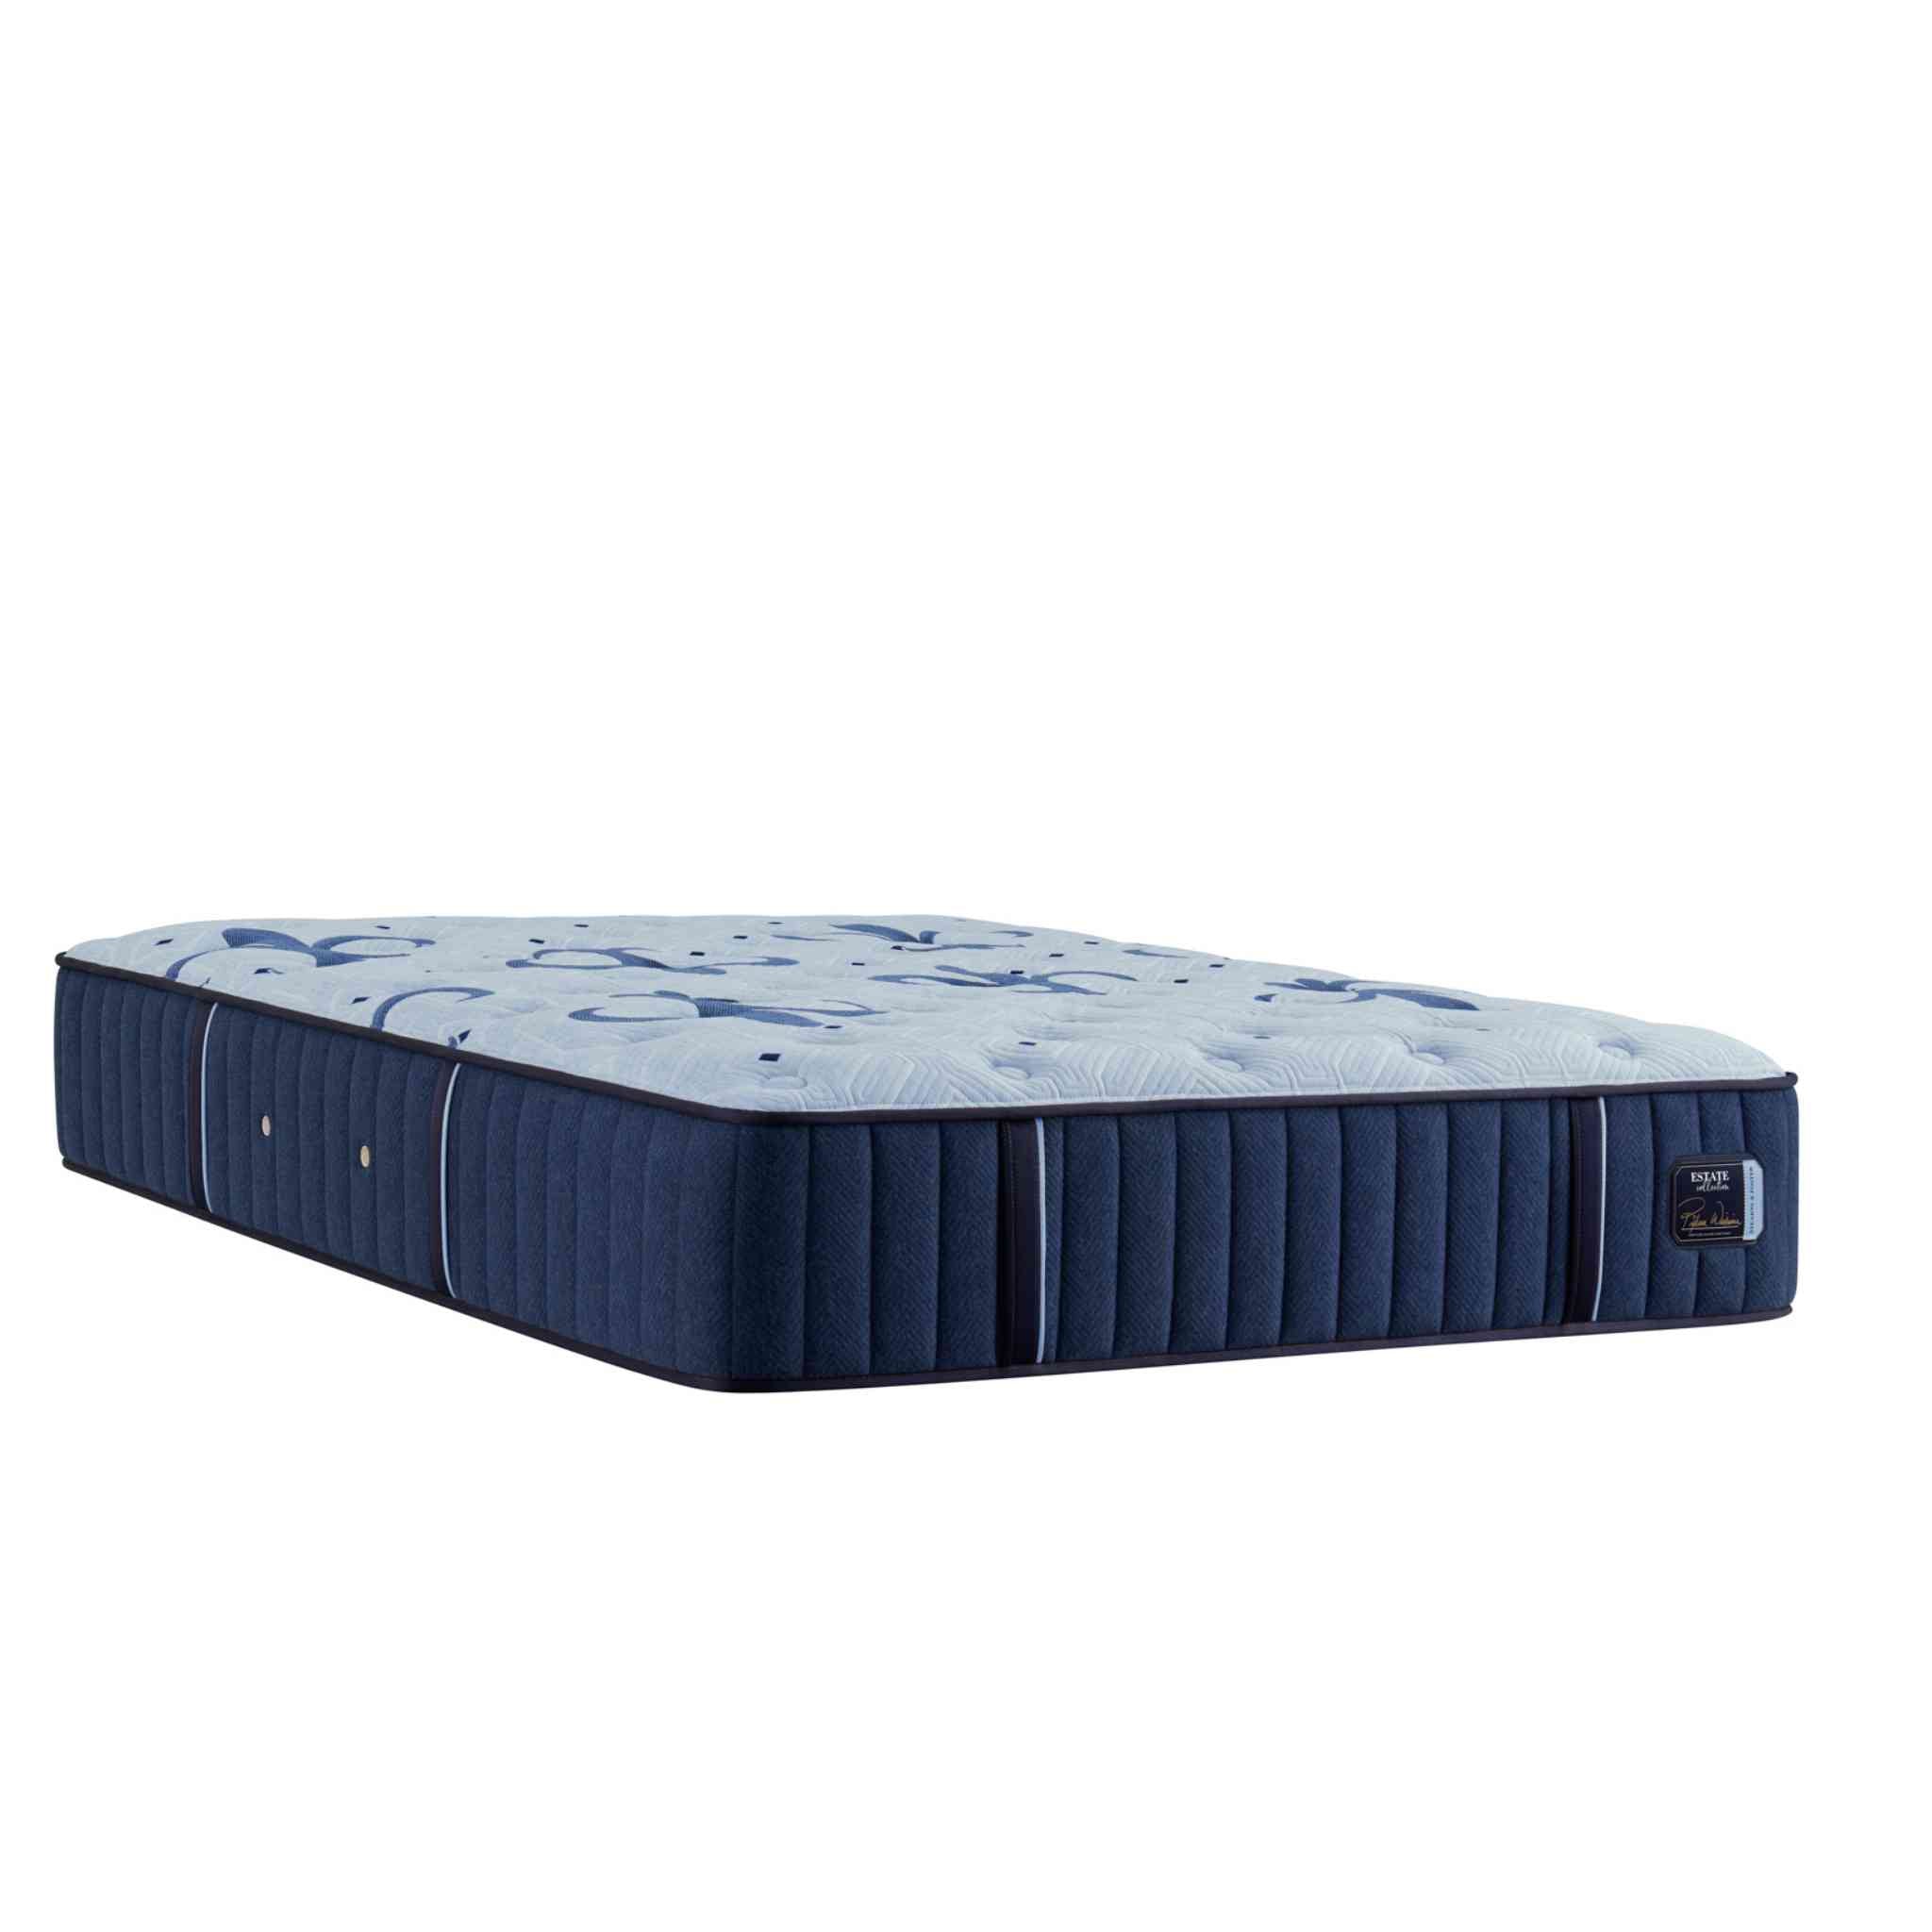 Stearns & Foster® Estate Collection Soft Tight Top - California King Size Mattress